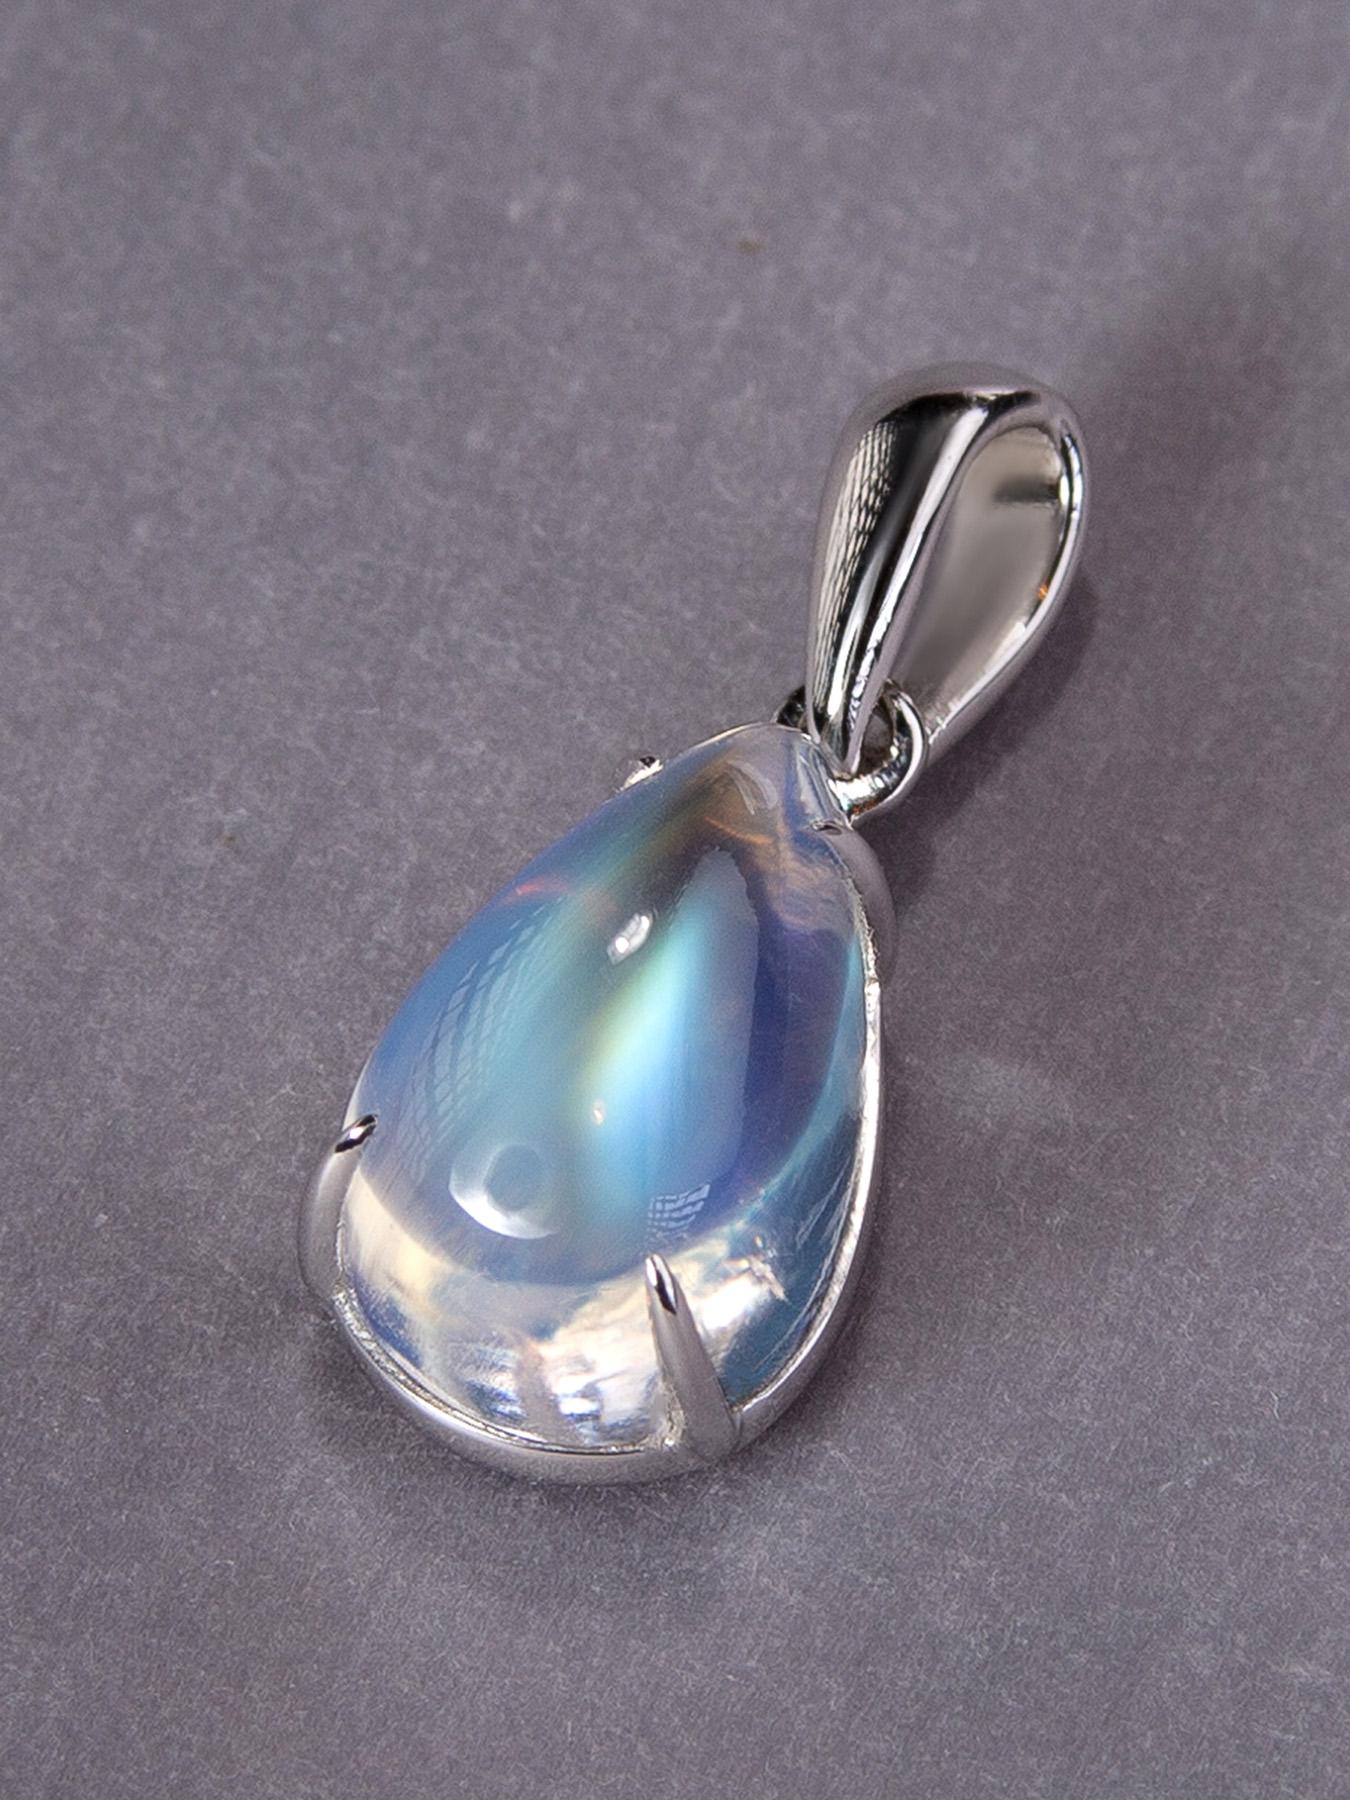 14K white gold pendant with natural adularia moonstone

gemstone origin - Sri Lanka

stone measurements - 0.20 x 0.26 x 0.43 in / 5 x 7 x 11 mm

moonstone weight - 3.70 carats

pendant length - 0.71 in / 18 mm

pendant weight - 1.41 grams